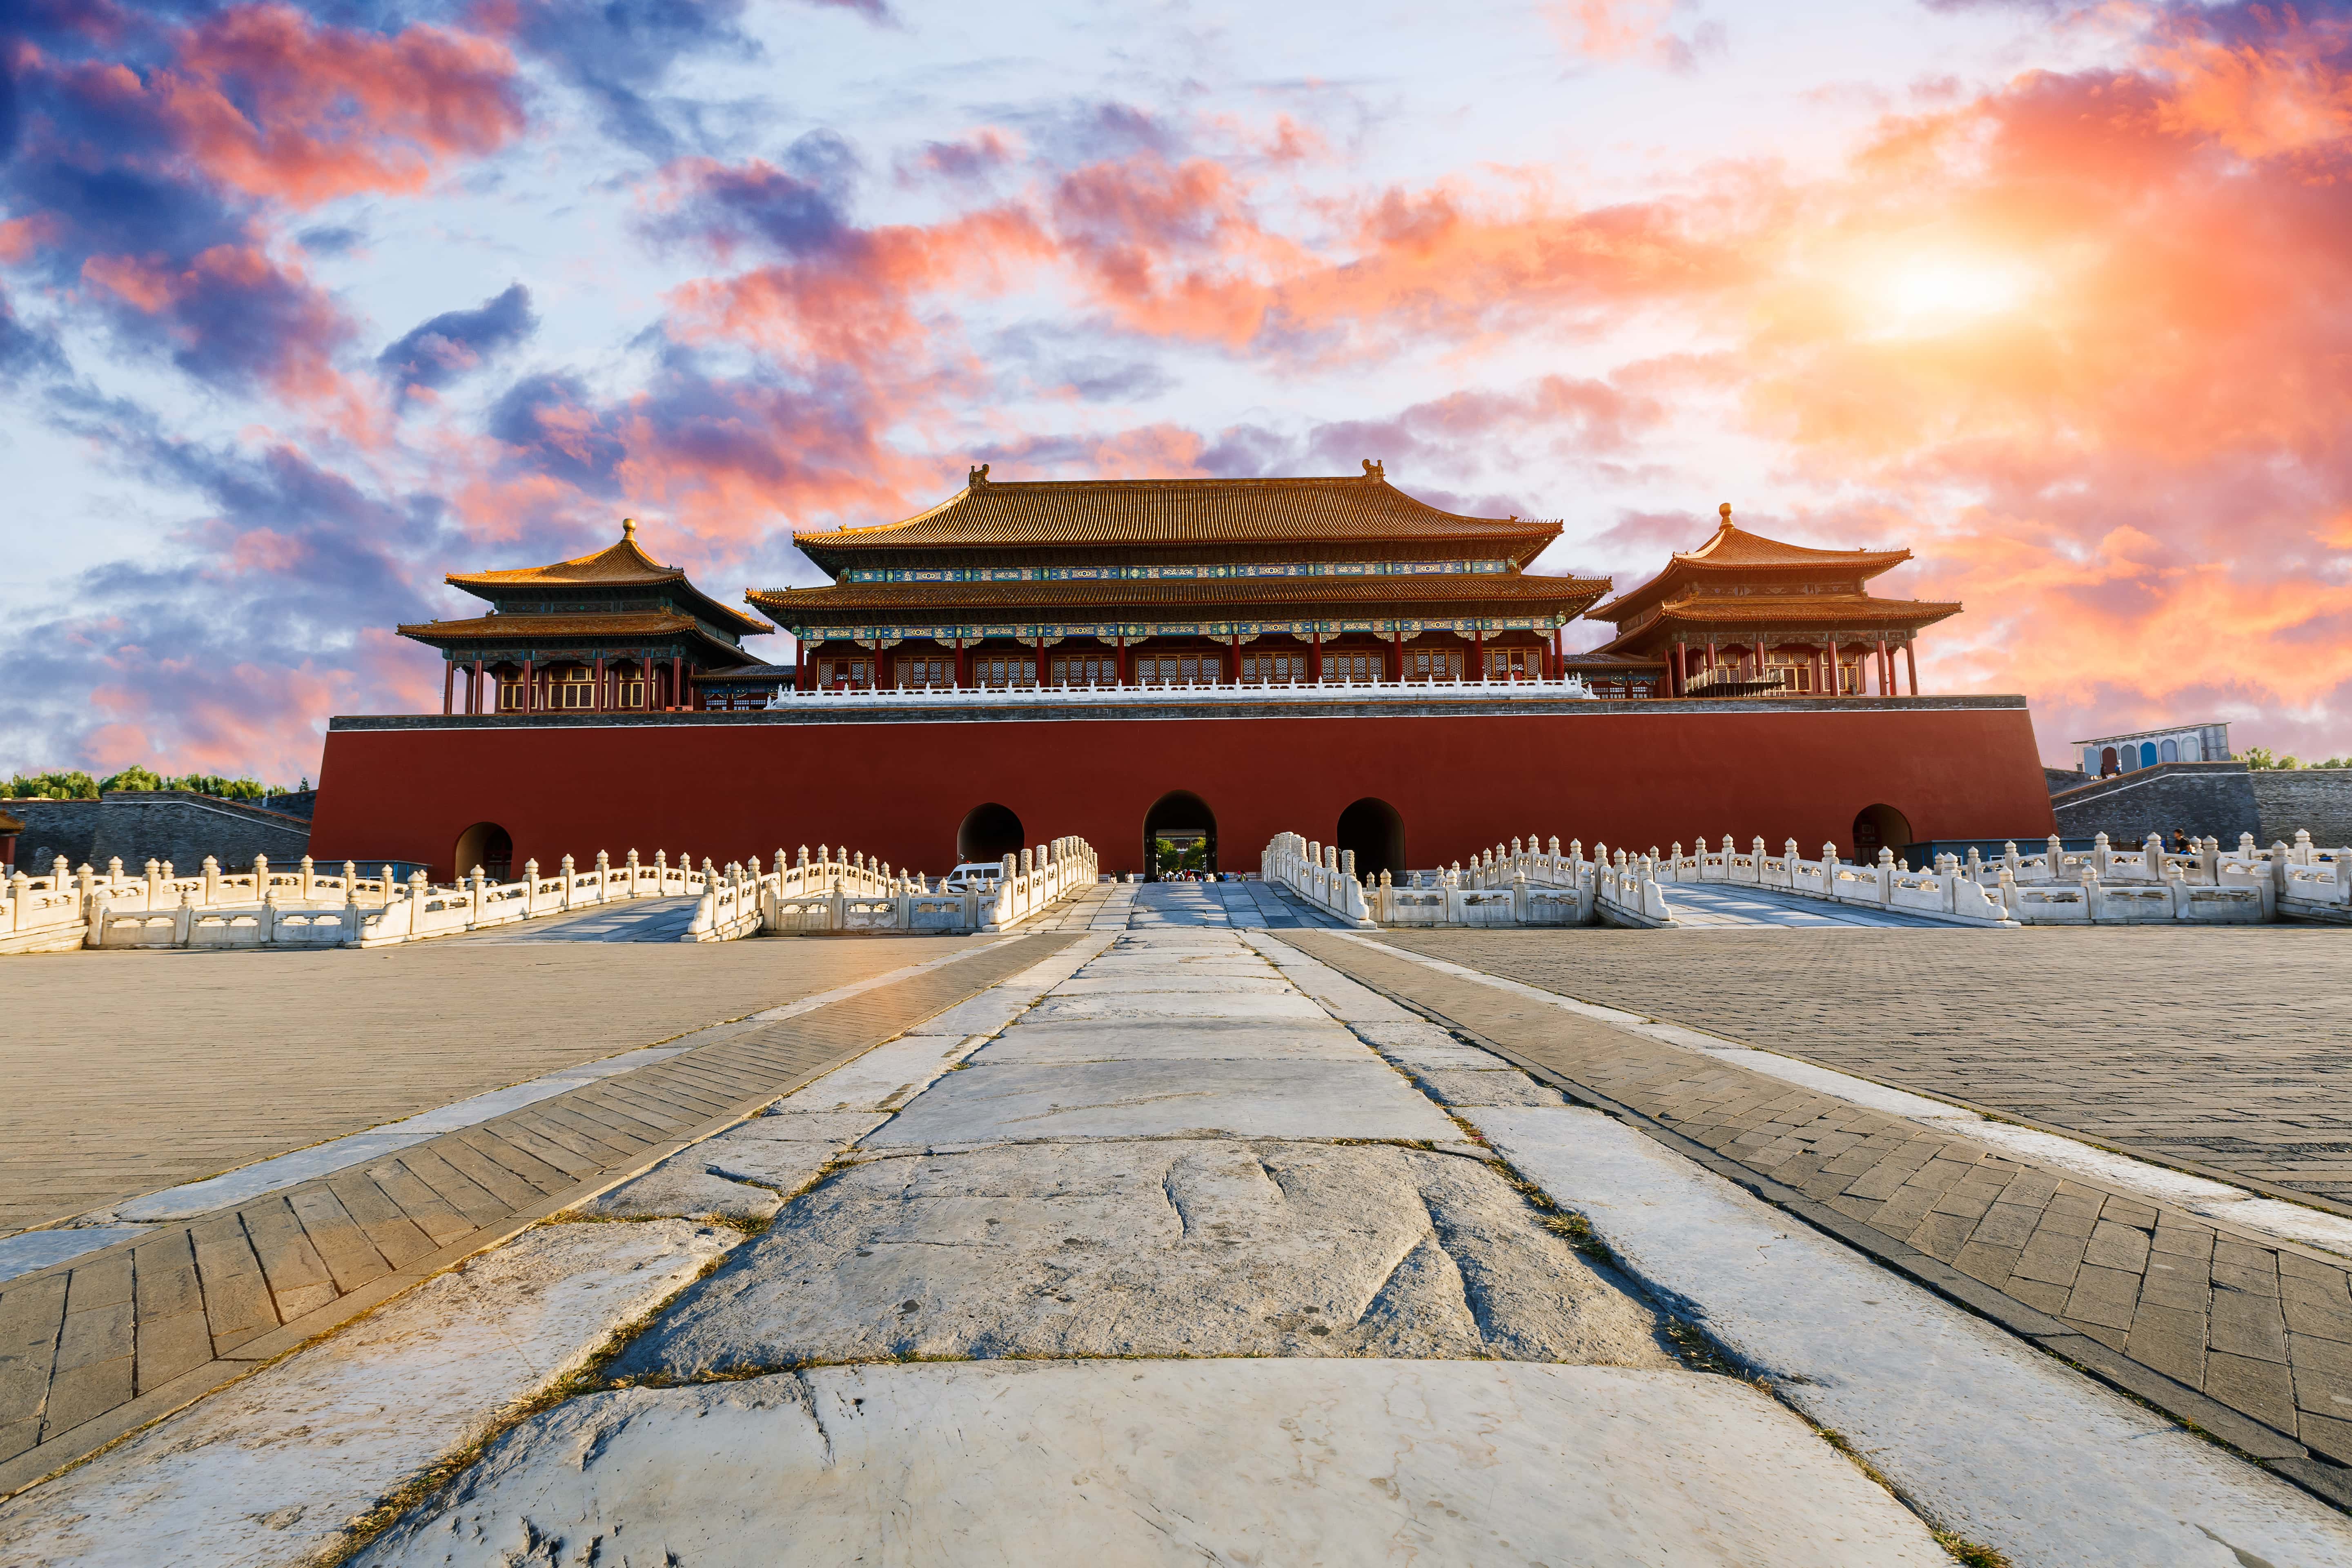 Ancient Royal Palaces of the Forbidden City in Beijing, China